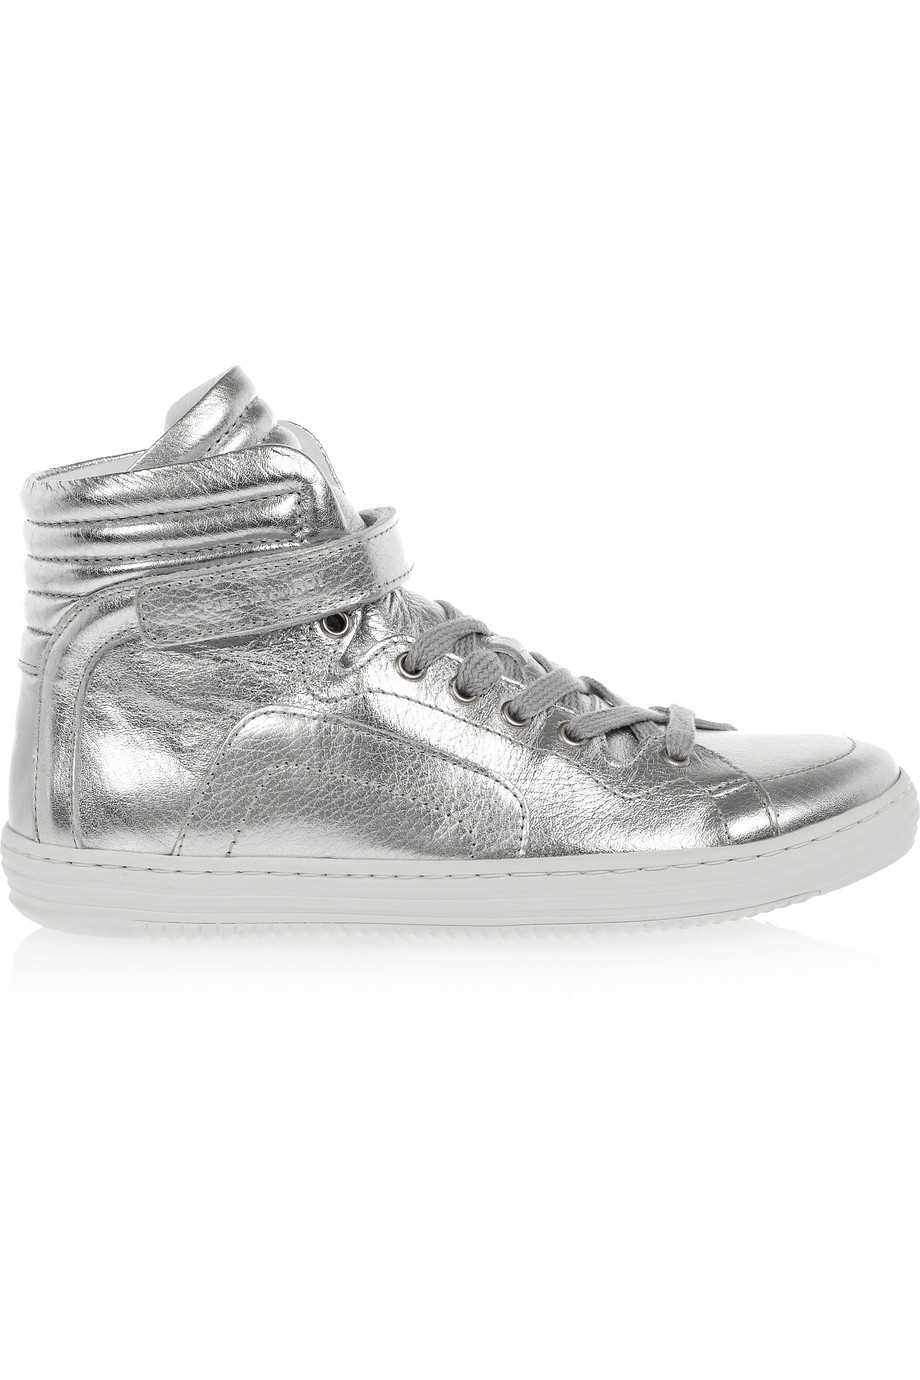 Pierre hardy Silver Foil Leather Carryover High_top Sneakers in ...